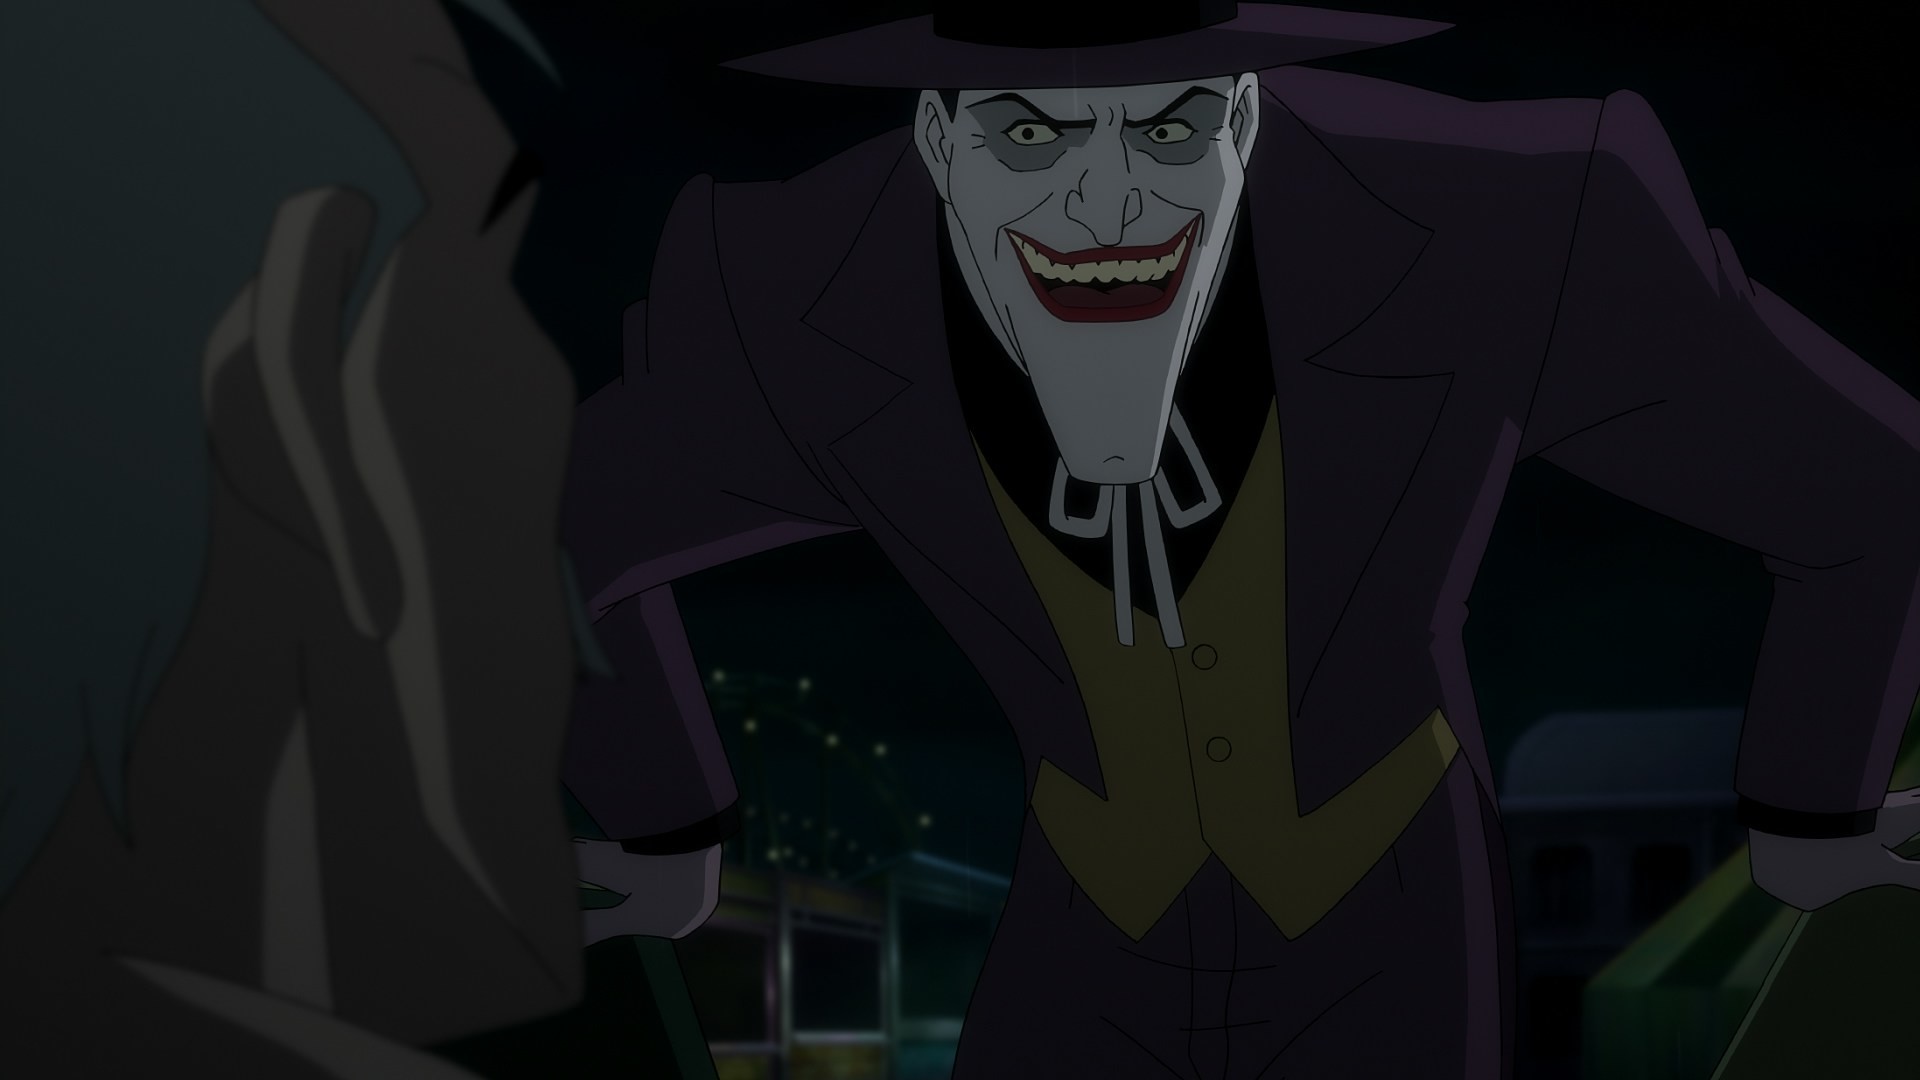 1920x1080 The dark journey into insanity begins as “Batman: The Killing Joke” gets  the big-screen treatment for one night on Monday, July 25, 2016 at 7:30  p.m. and ...